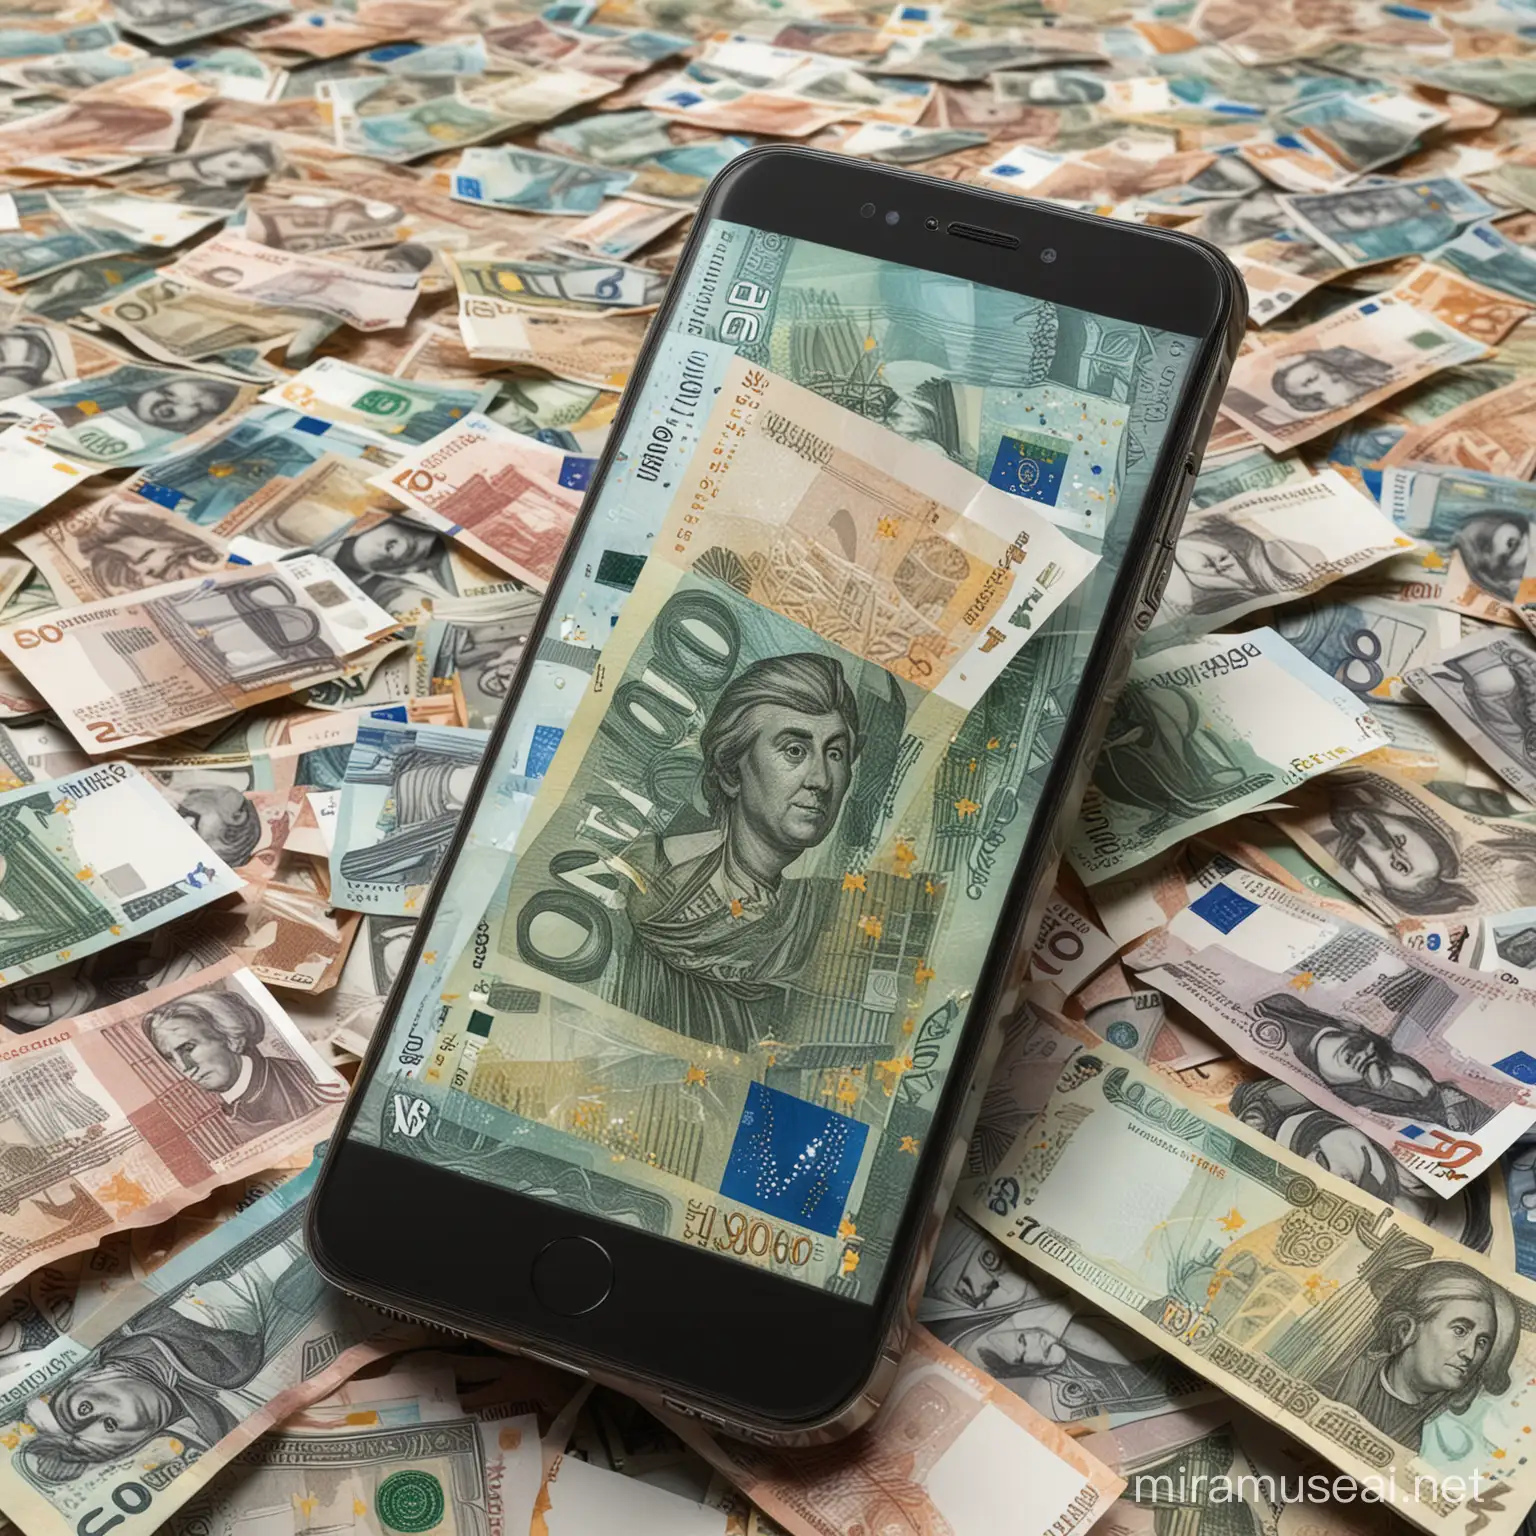 Hyperrealistic Smartphone Displaying Euro Currency Notes